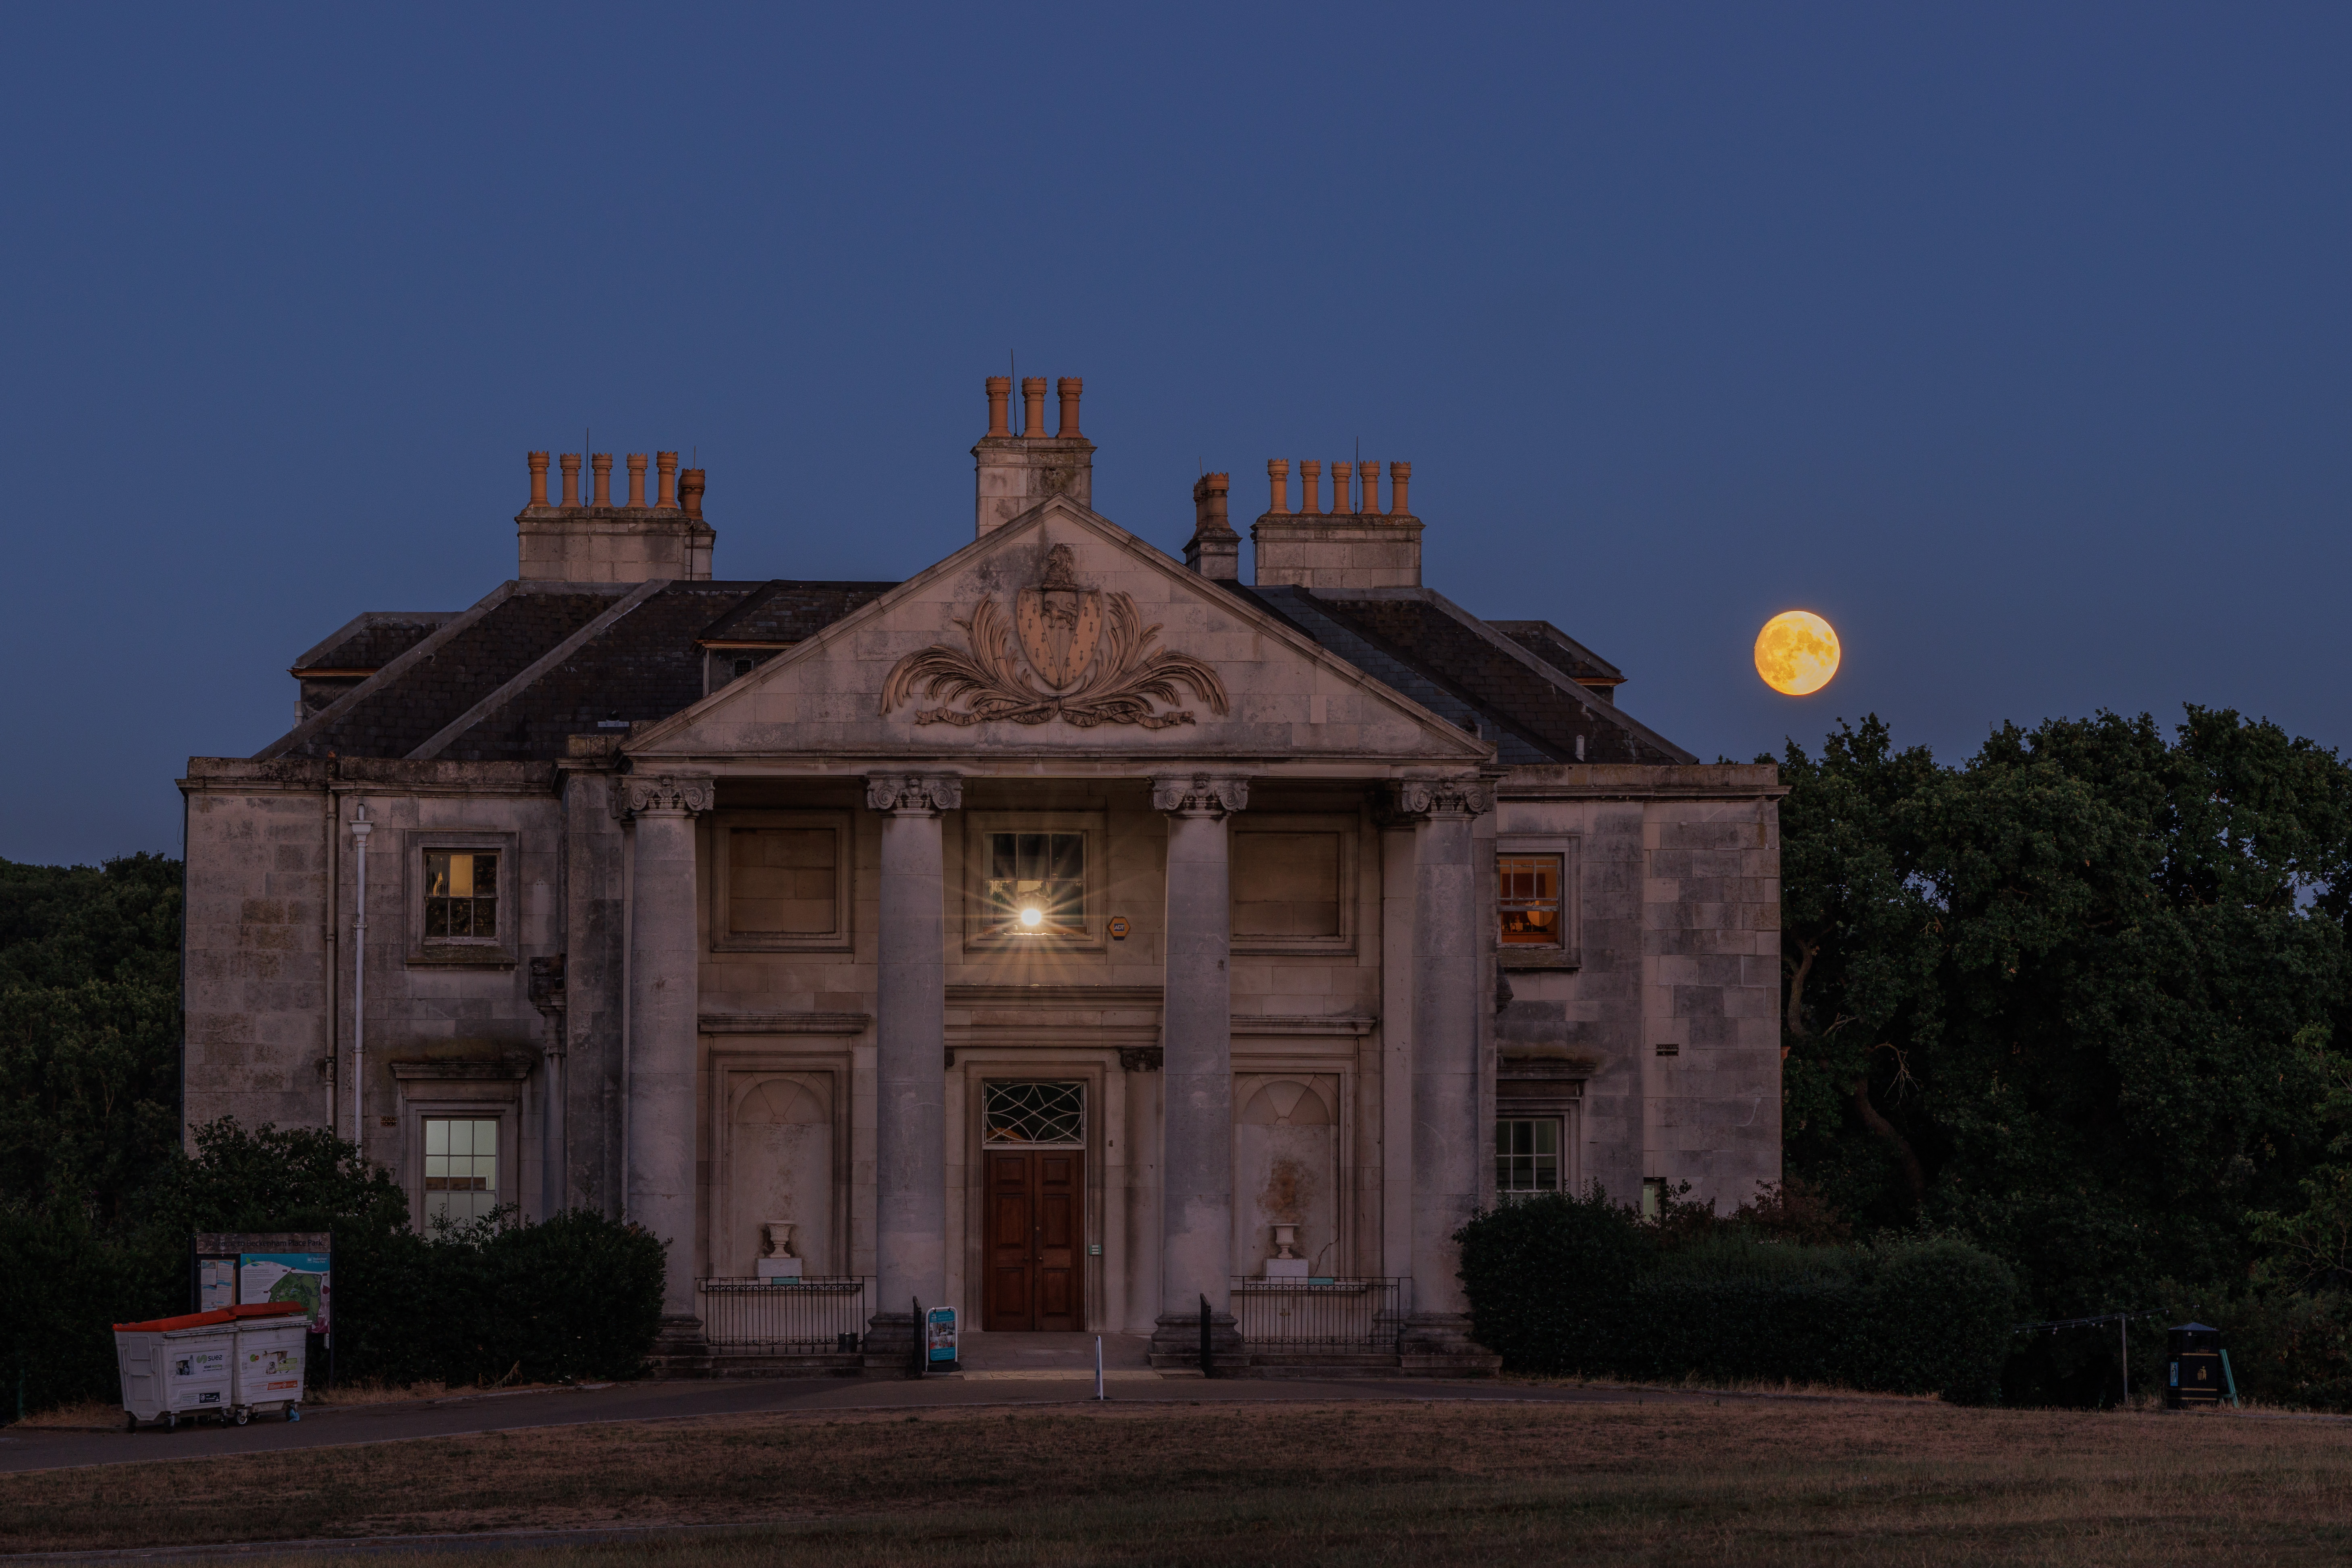 Moonrise Dynamic Range Canon EOS R10 sample image, A manor at night with the full moon.